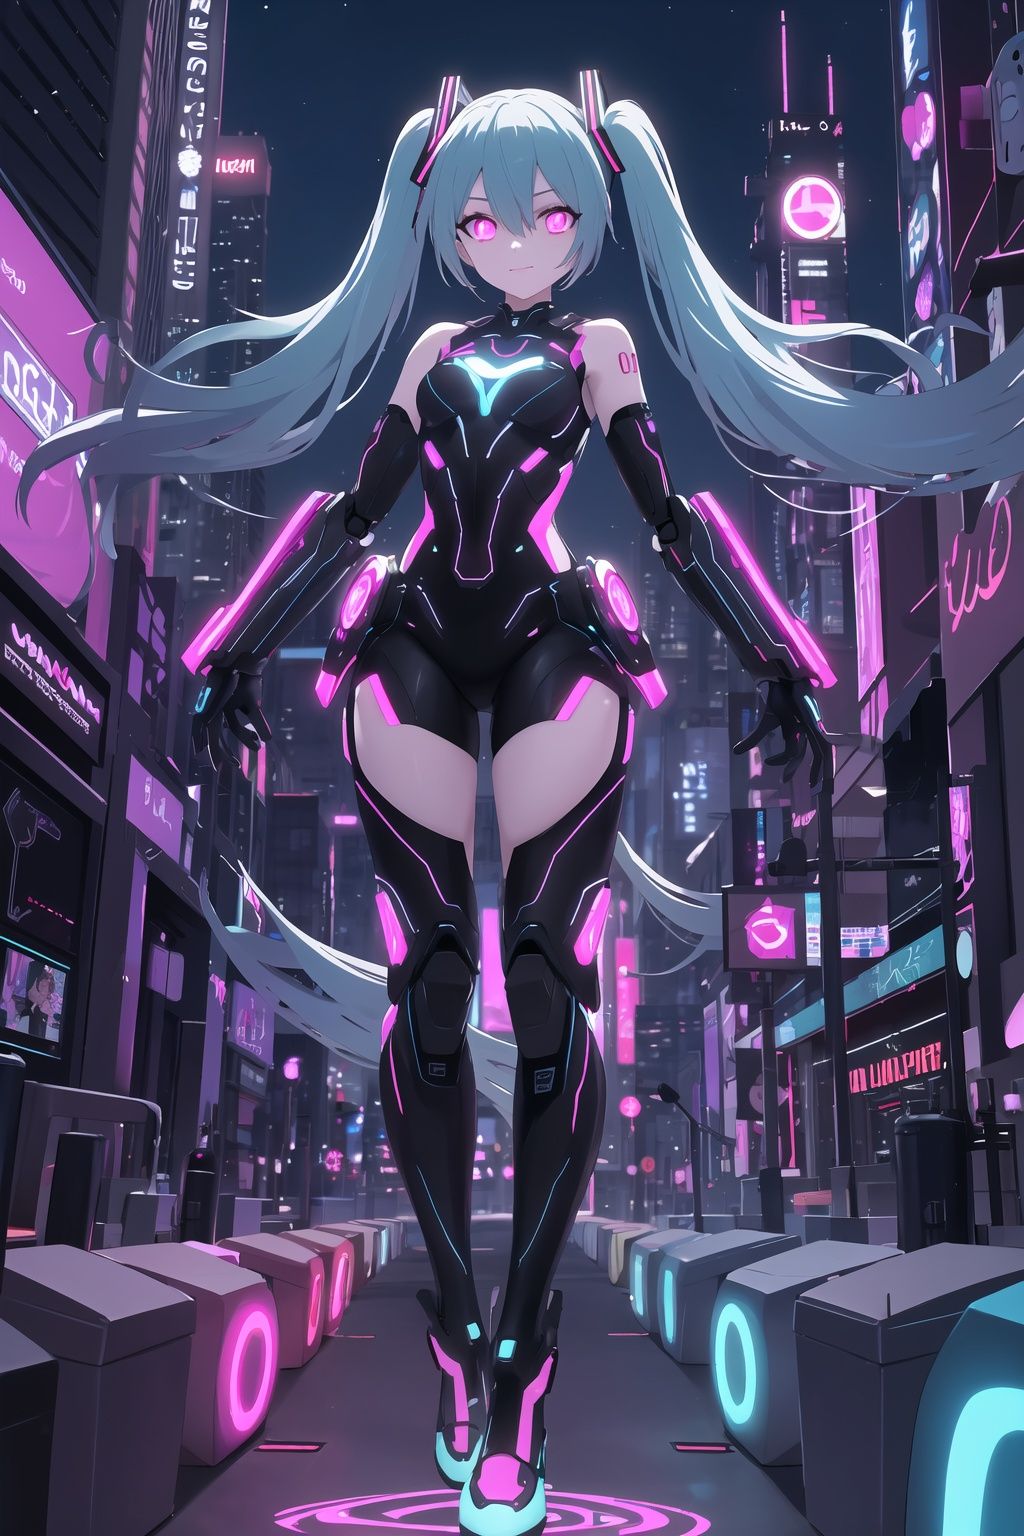 futuristic-style Hatsune Miku,cyberpunk elements,neon lights,holographic accessories,digital environment,advanced technology,robotic aesthetics,anime character,colorful hair,dynamic pose,urban backdrop,glowing eyes,virtual idol,high-tech fashion,immersive atmosphere,vibrant colors,future city skyline,cutting-edge design,stylish outfit,hologram effects,digital art,sci-fi elements,energetic vibe,youth culture,modern anime style,holographic display,illuminated cityscape,night scene,advanced gadgets,cool attitude,, masterpiece, best quality,